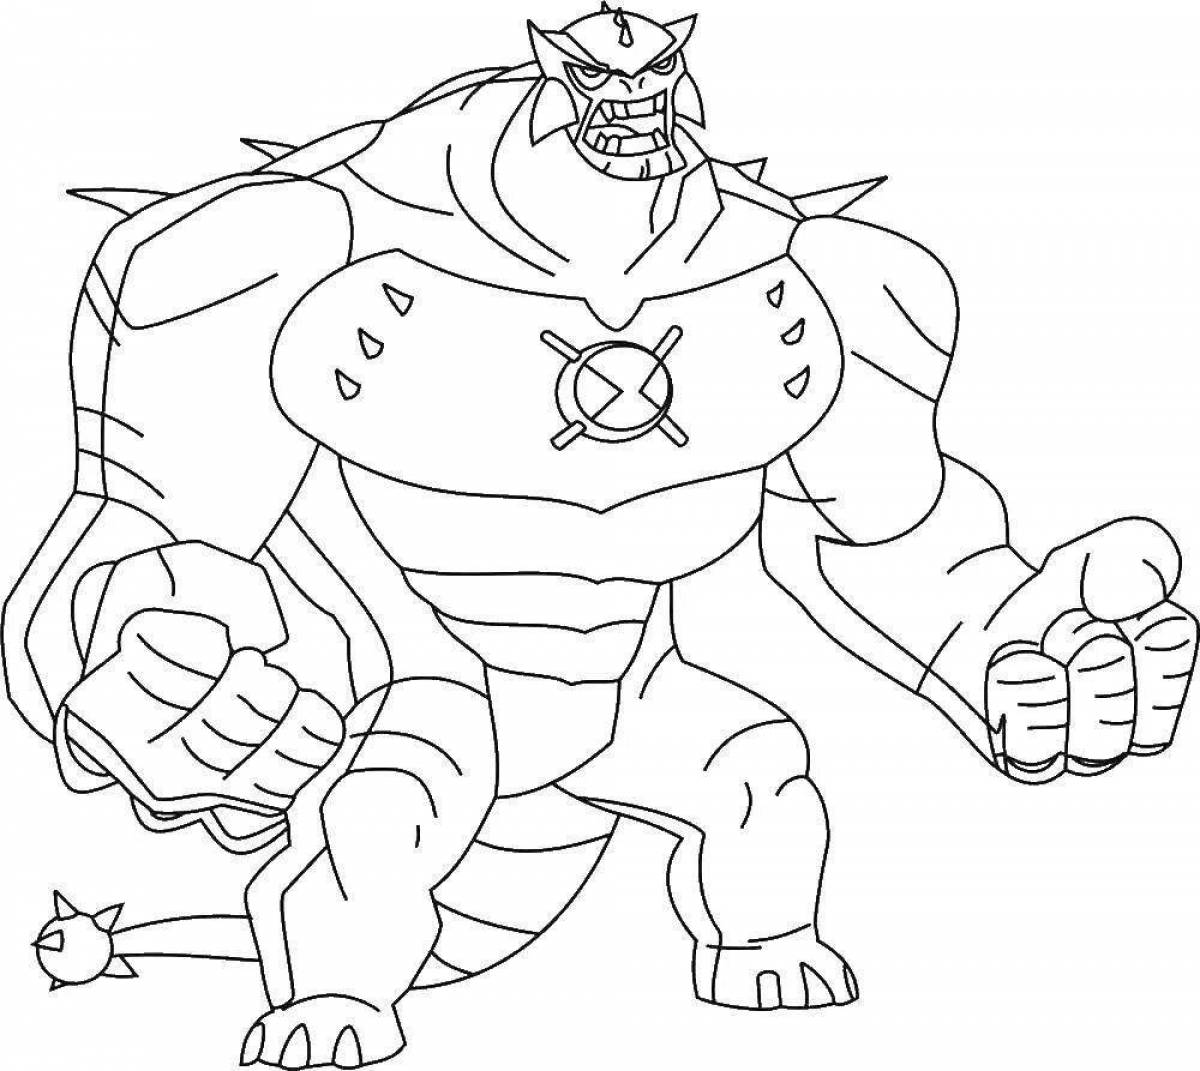 Exciting fights coloring book